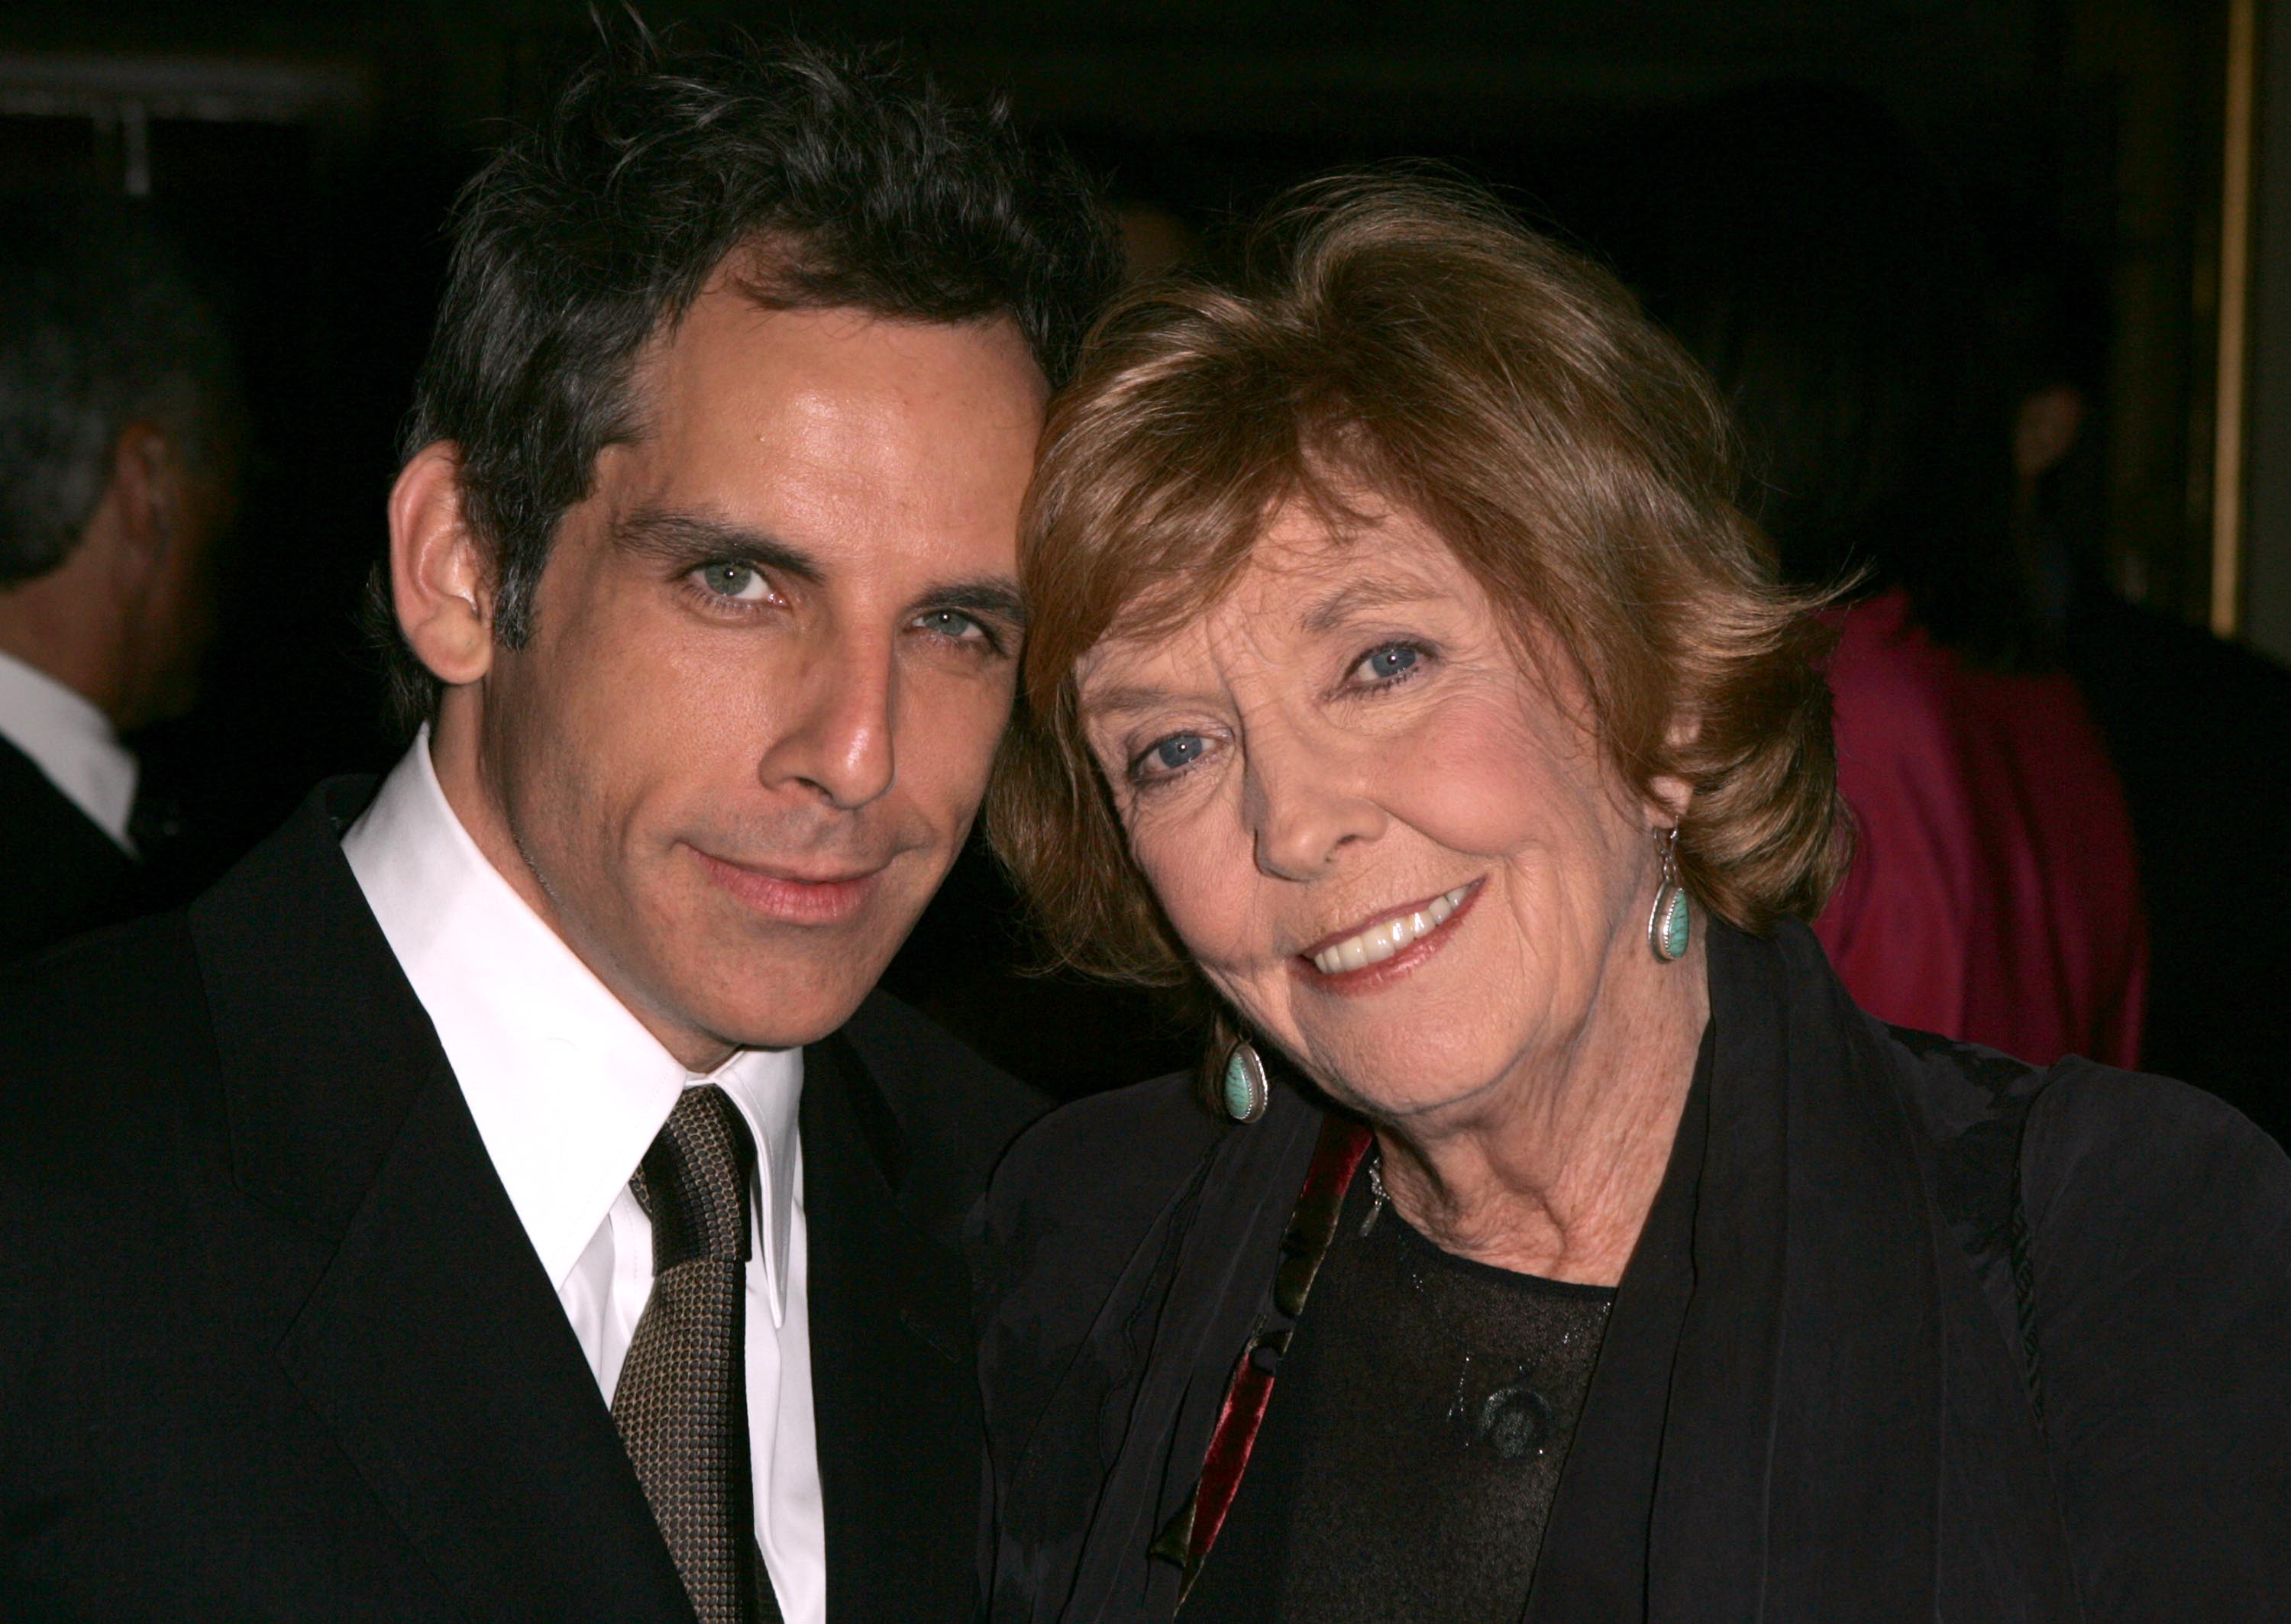 Ben Stiller and Anne Meara in Bel Air, California on November 11, 2004 | Source: Getty Images 